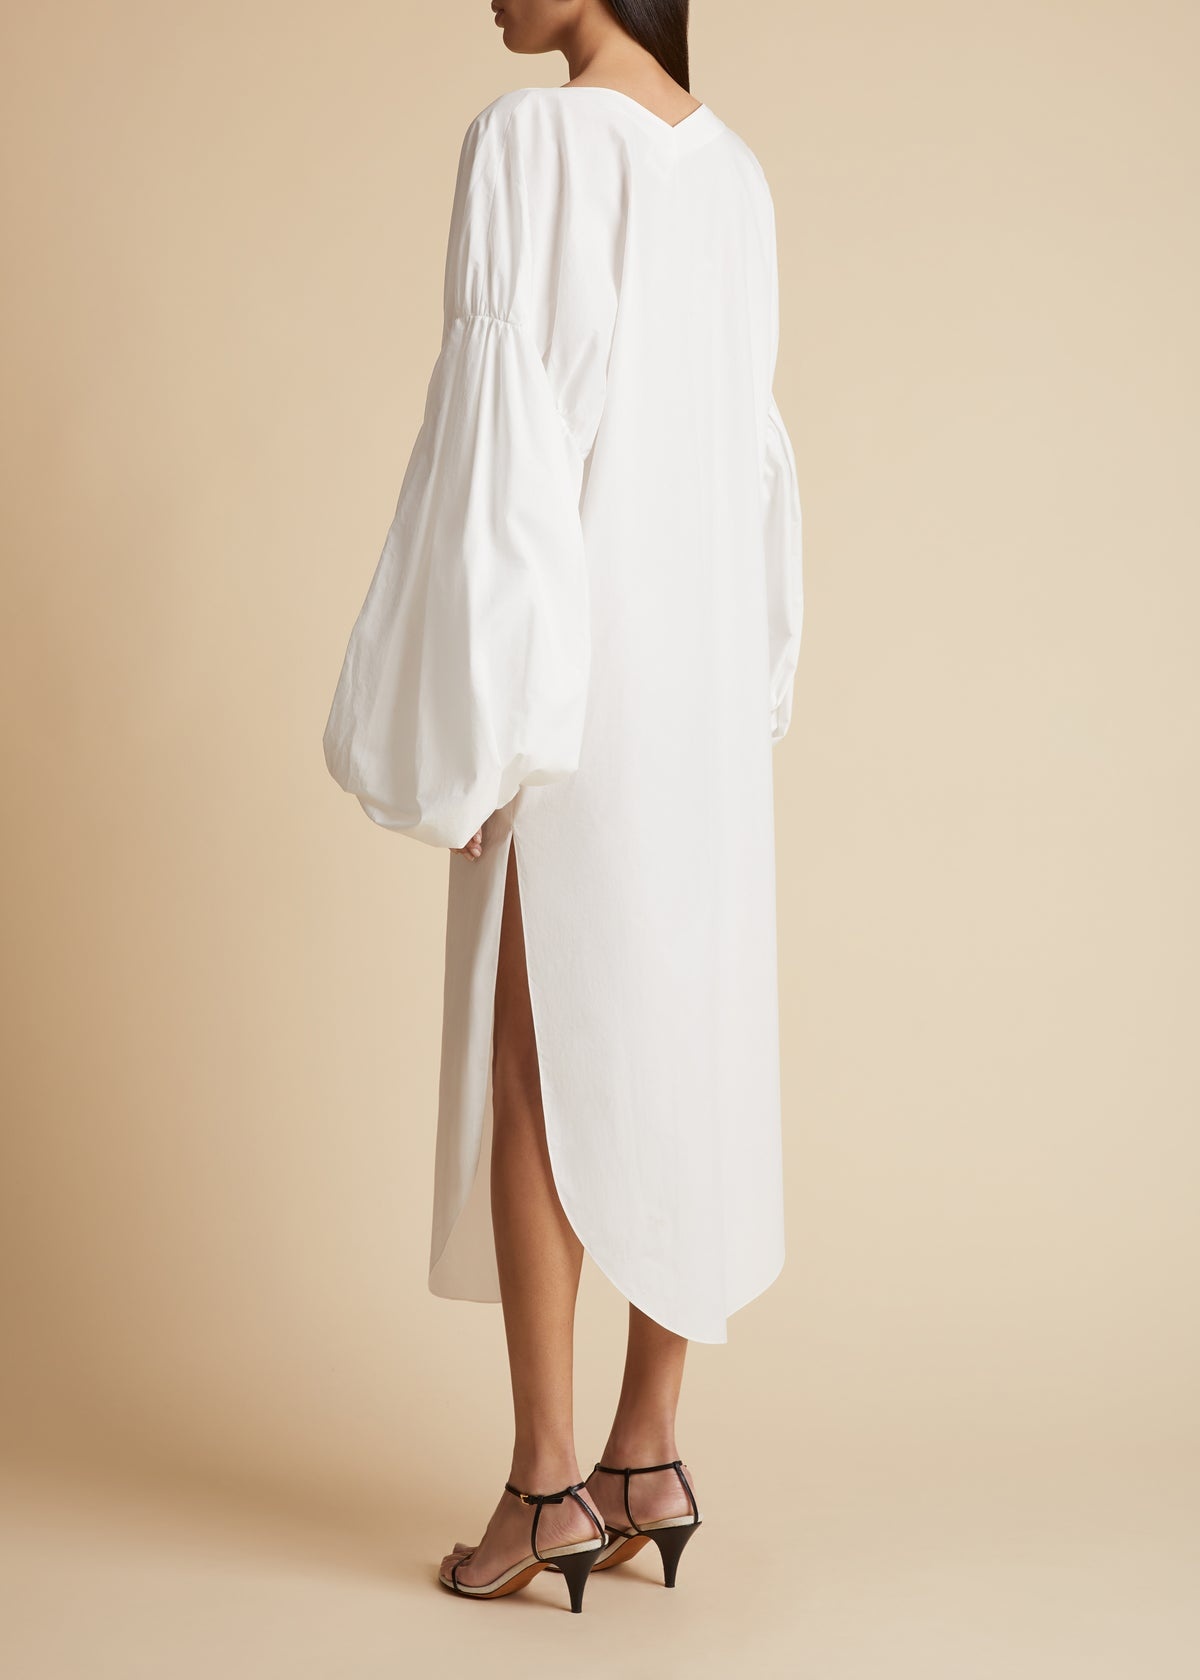 The Zelma Dress in White - 3